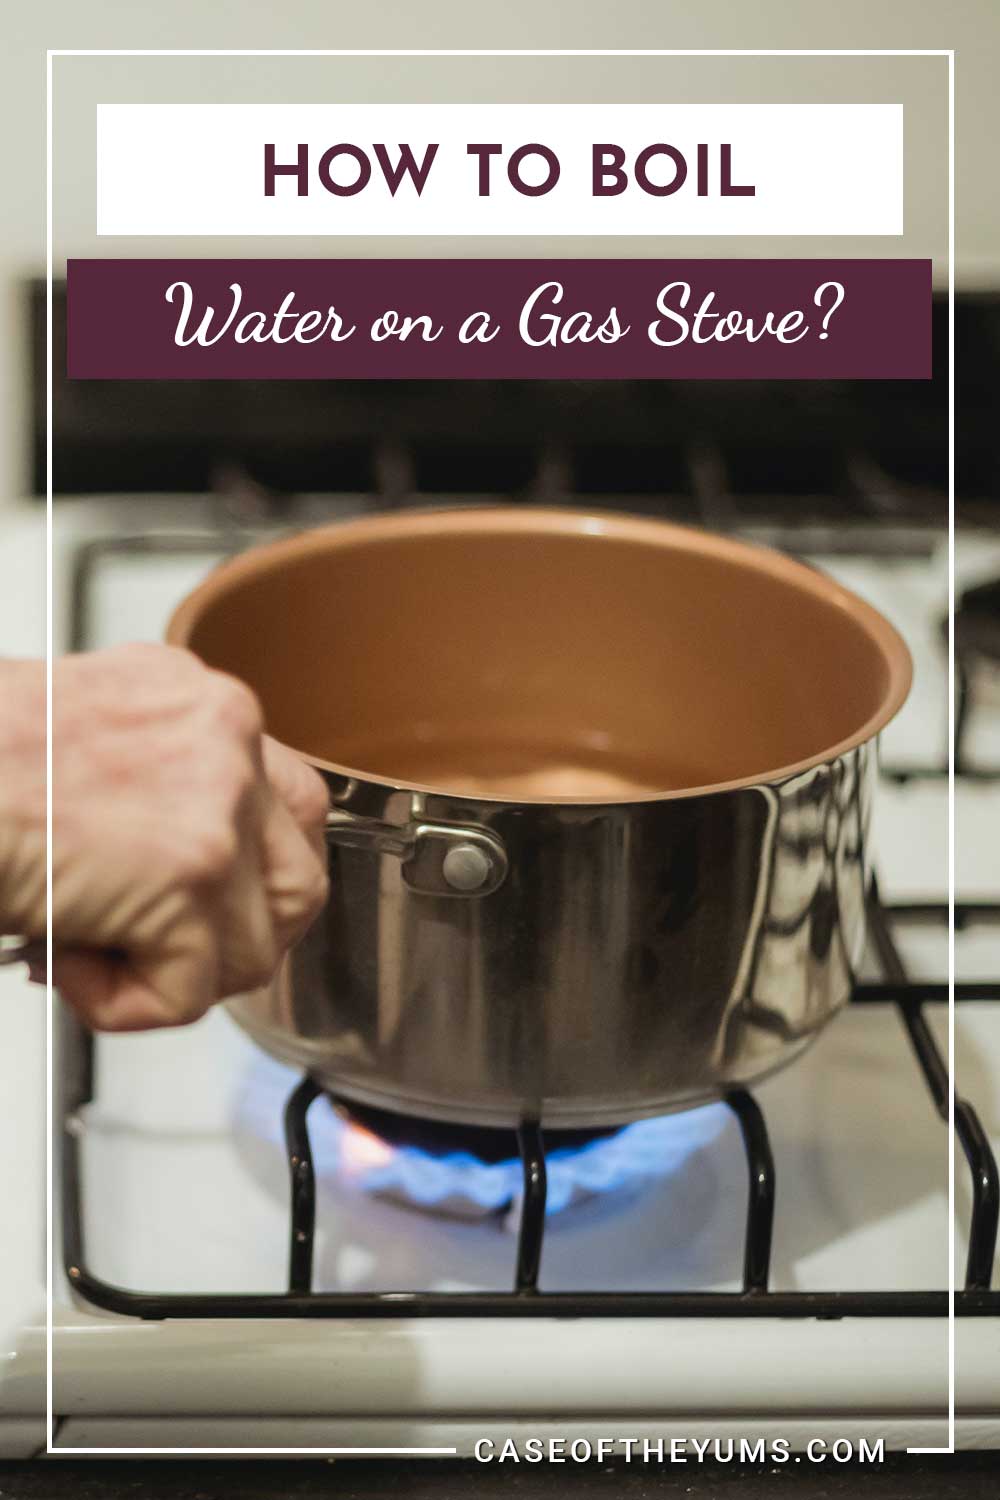 A pan putting on gas stove - How to Boil Water on it?